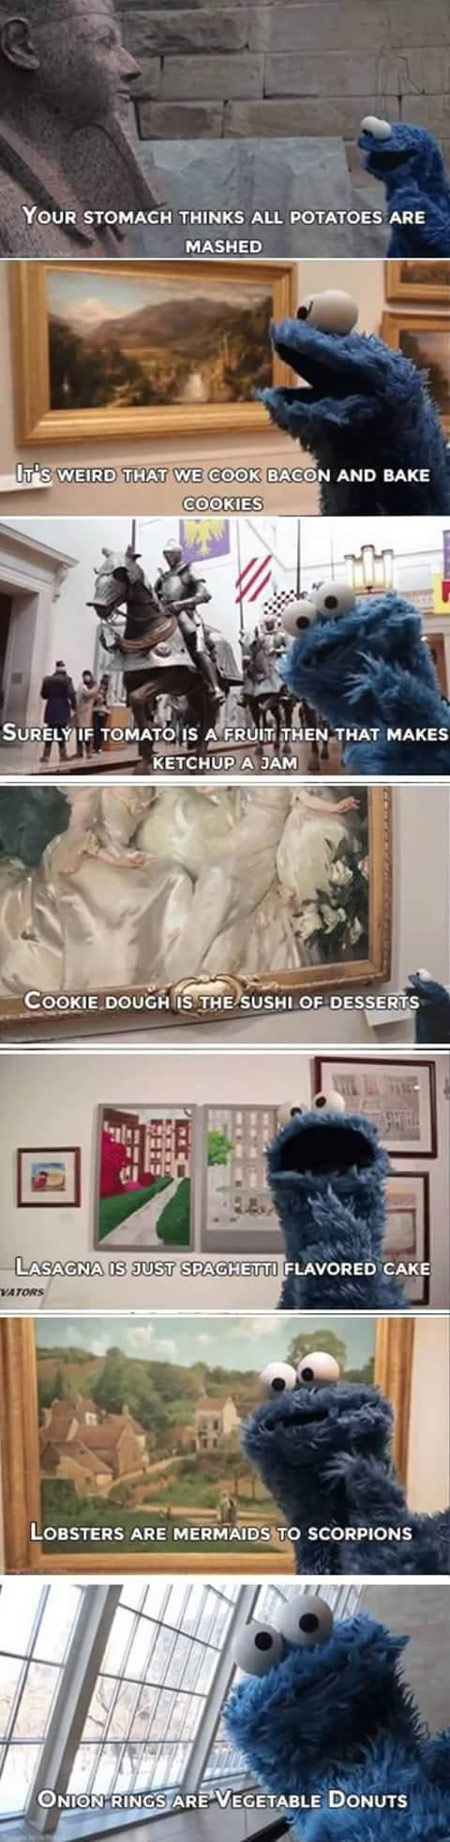 Some shower thoughts from the cookie monster